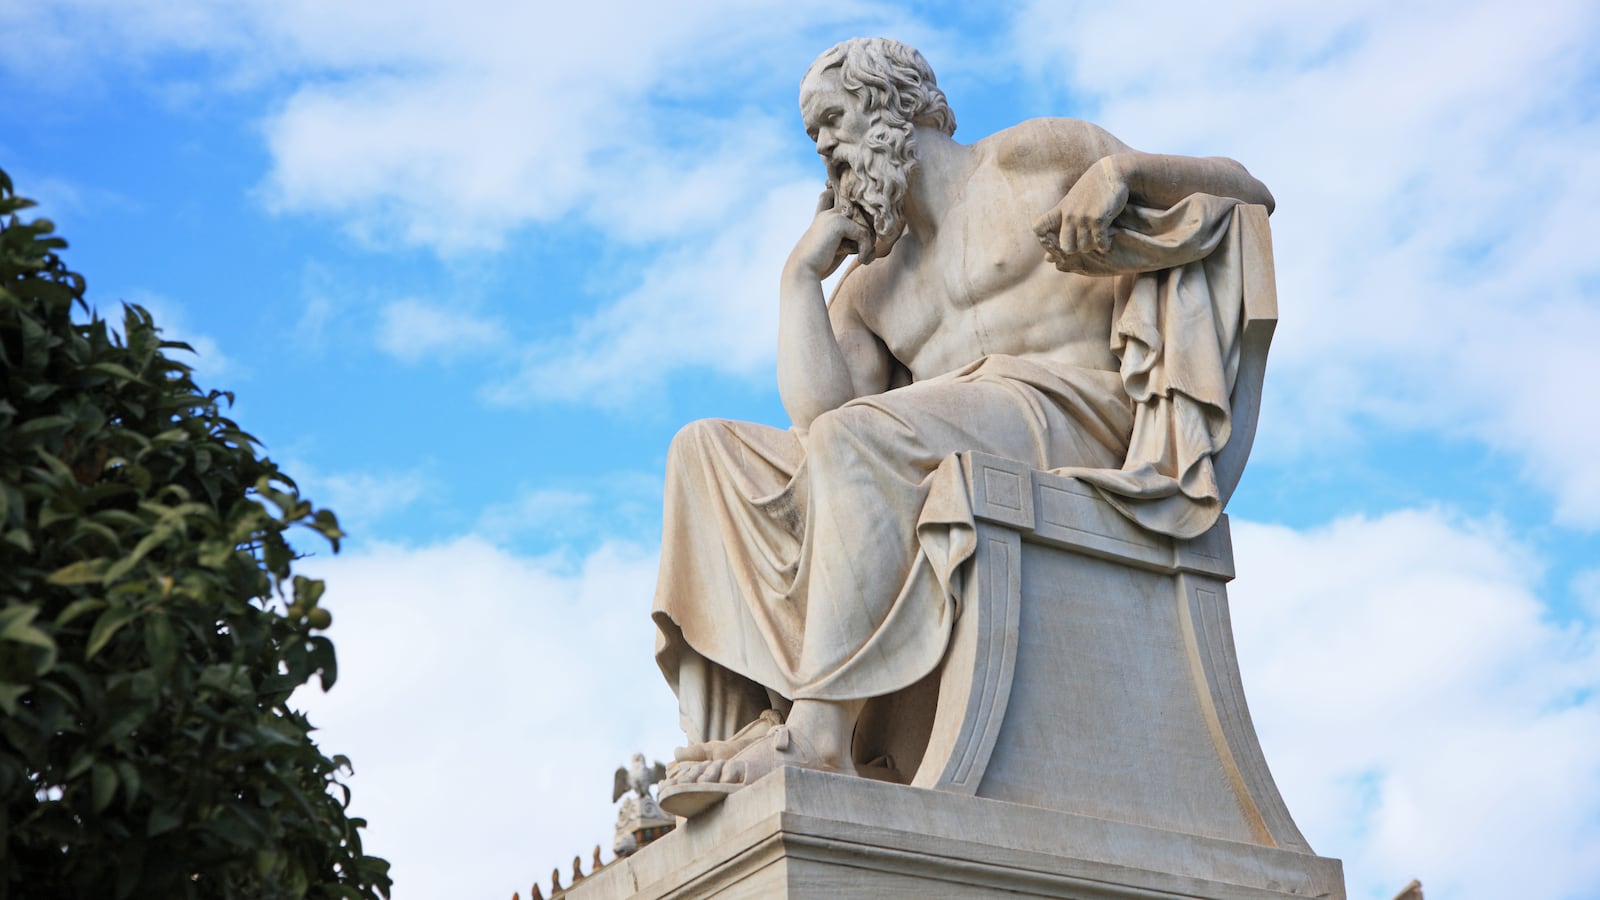 A Socrates statue in front of the Academy of Athens.